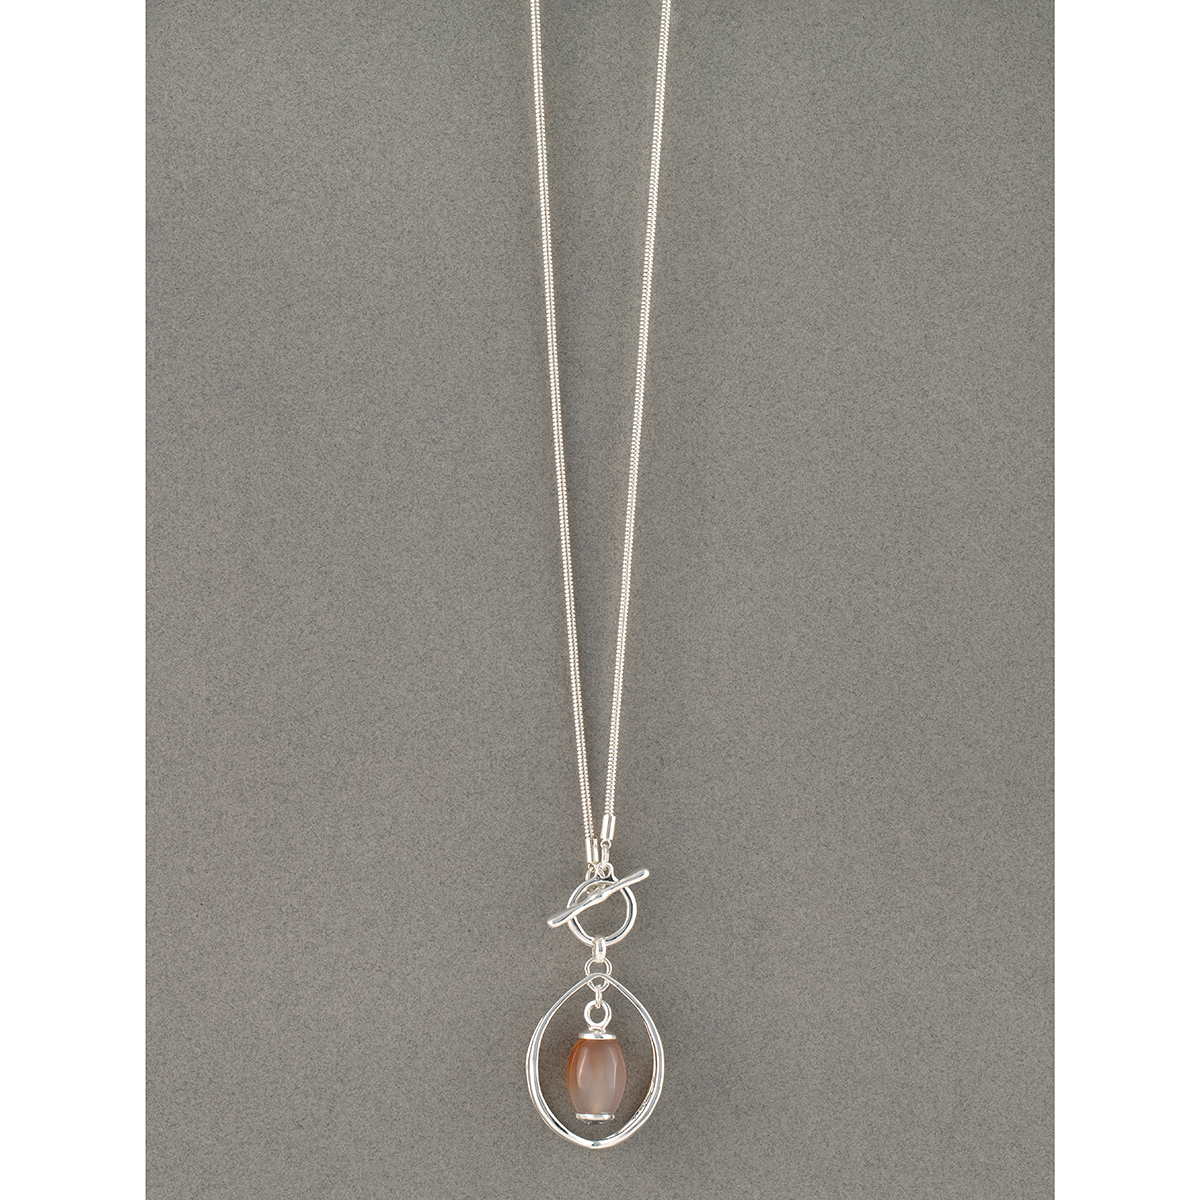 NECKLACE TEARDROP WITH CRYSTAL SI 1.5IN X 2IN; 32.25IN